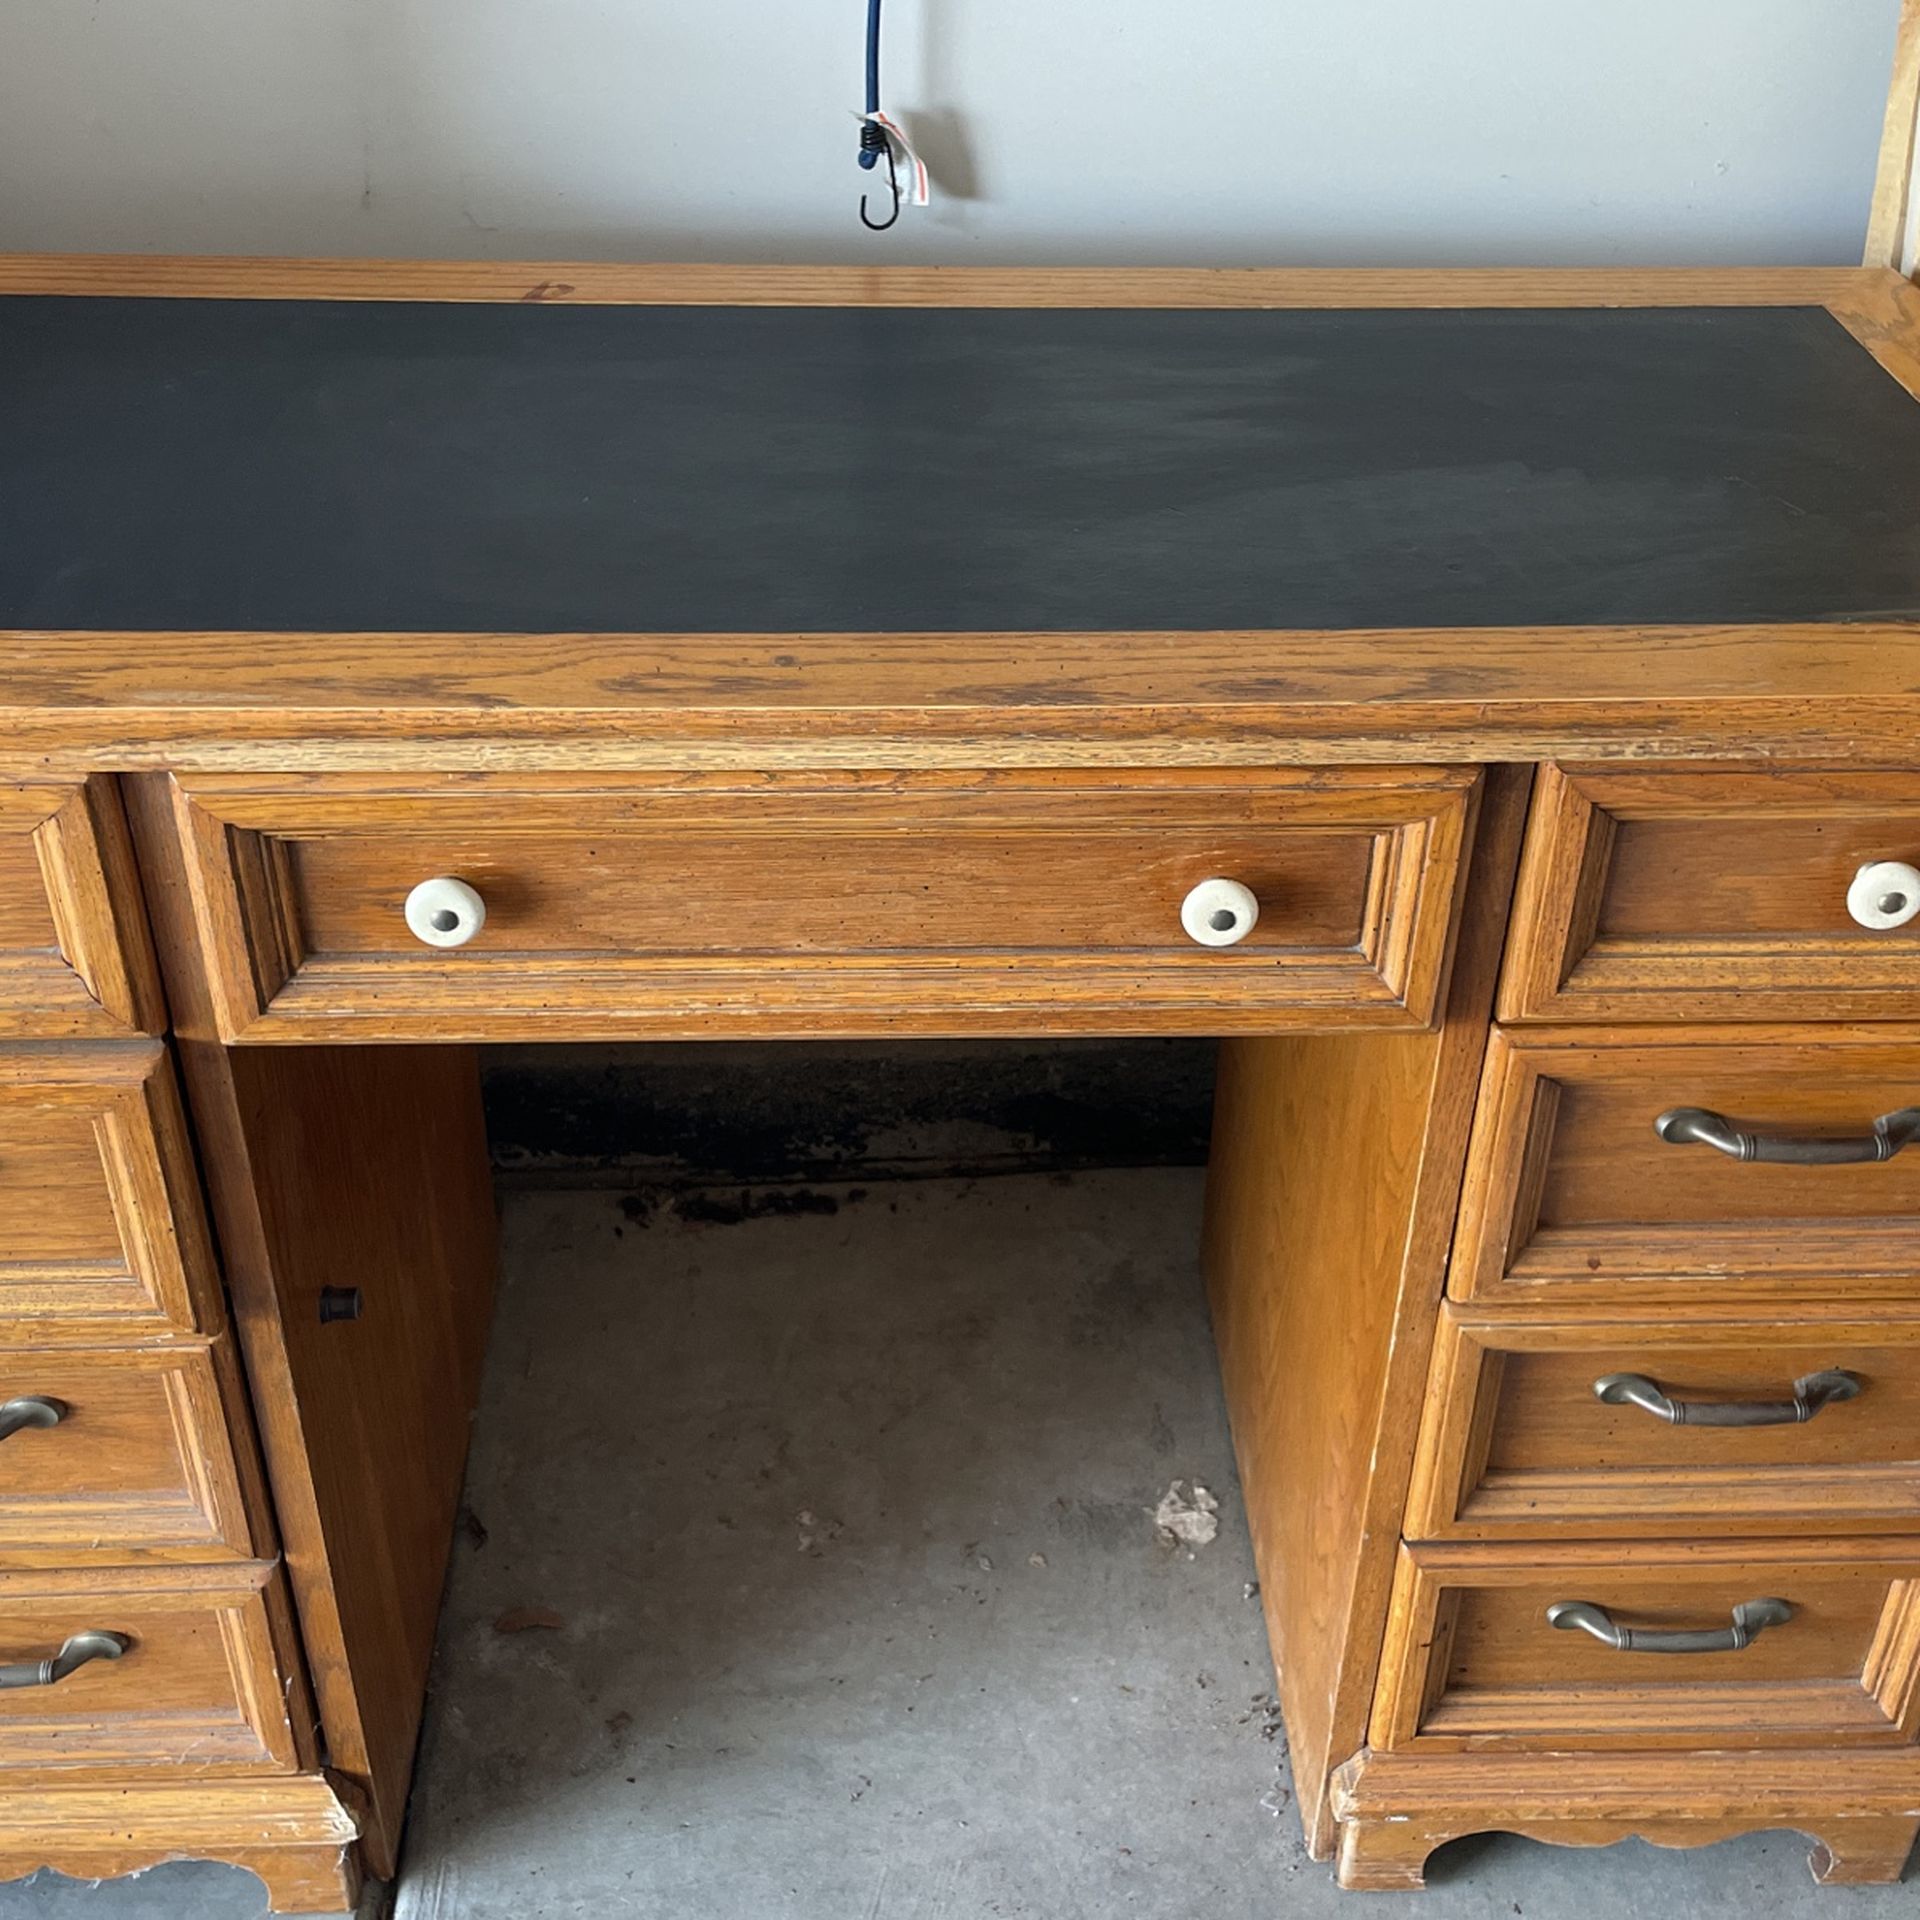 Leather Top Wood Desk